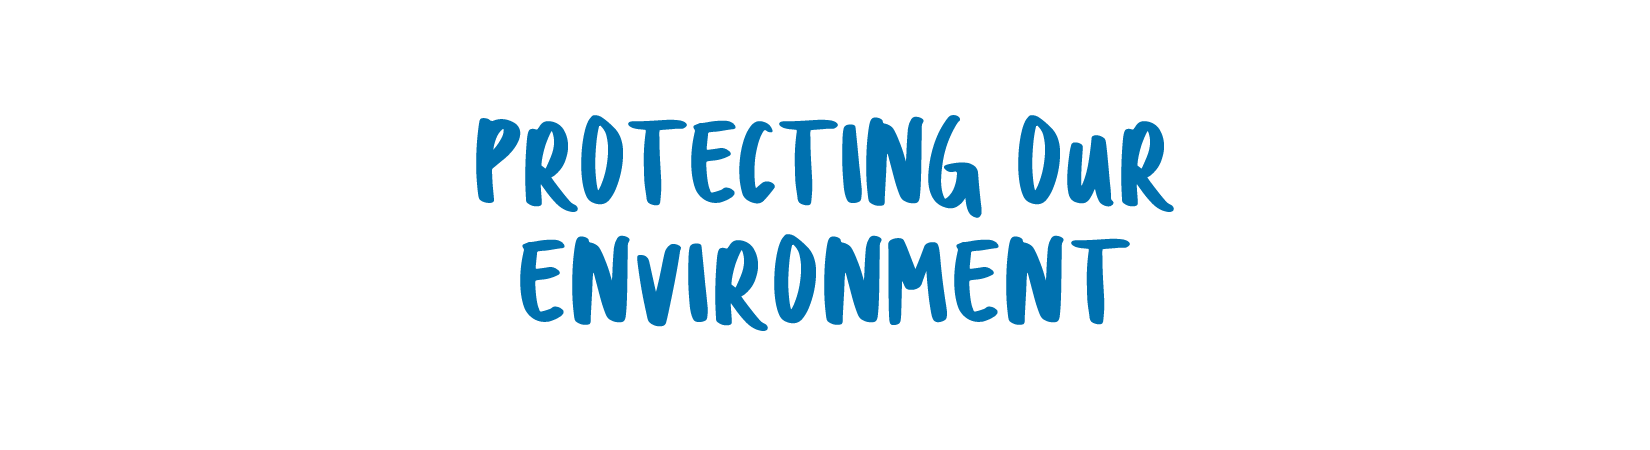 Protecting our environment banner